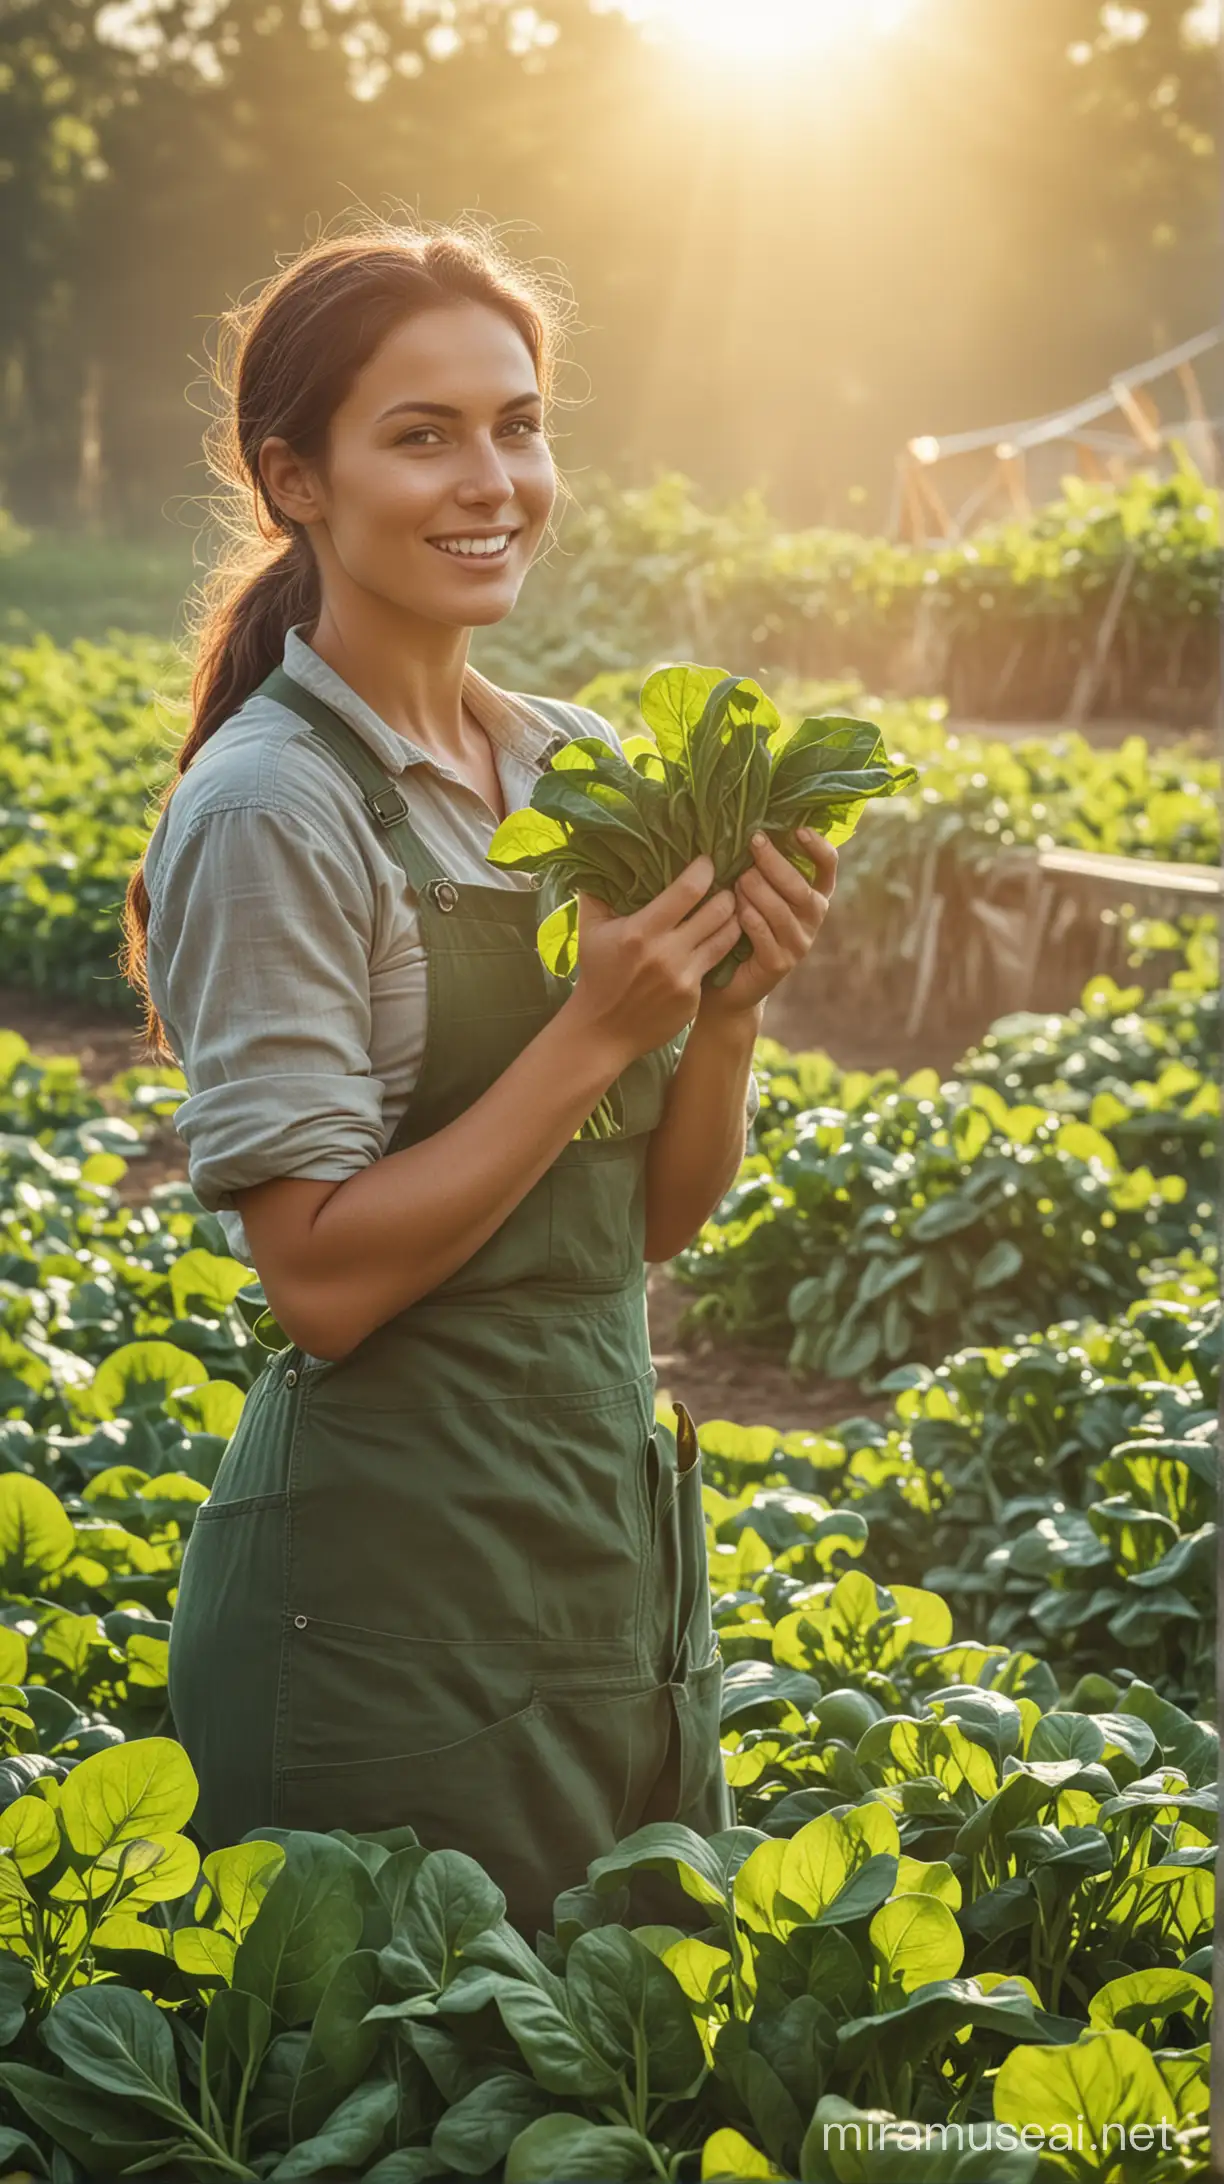 Gorgeous Farmer Women Holding Spinach Natural Background with Sunlight Effect